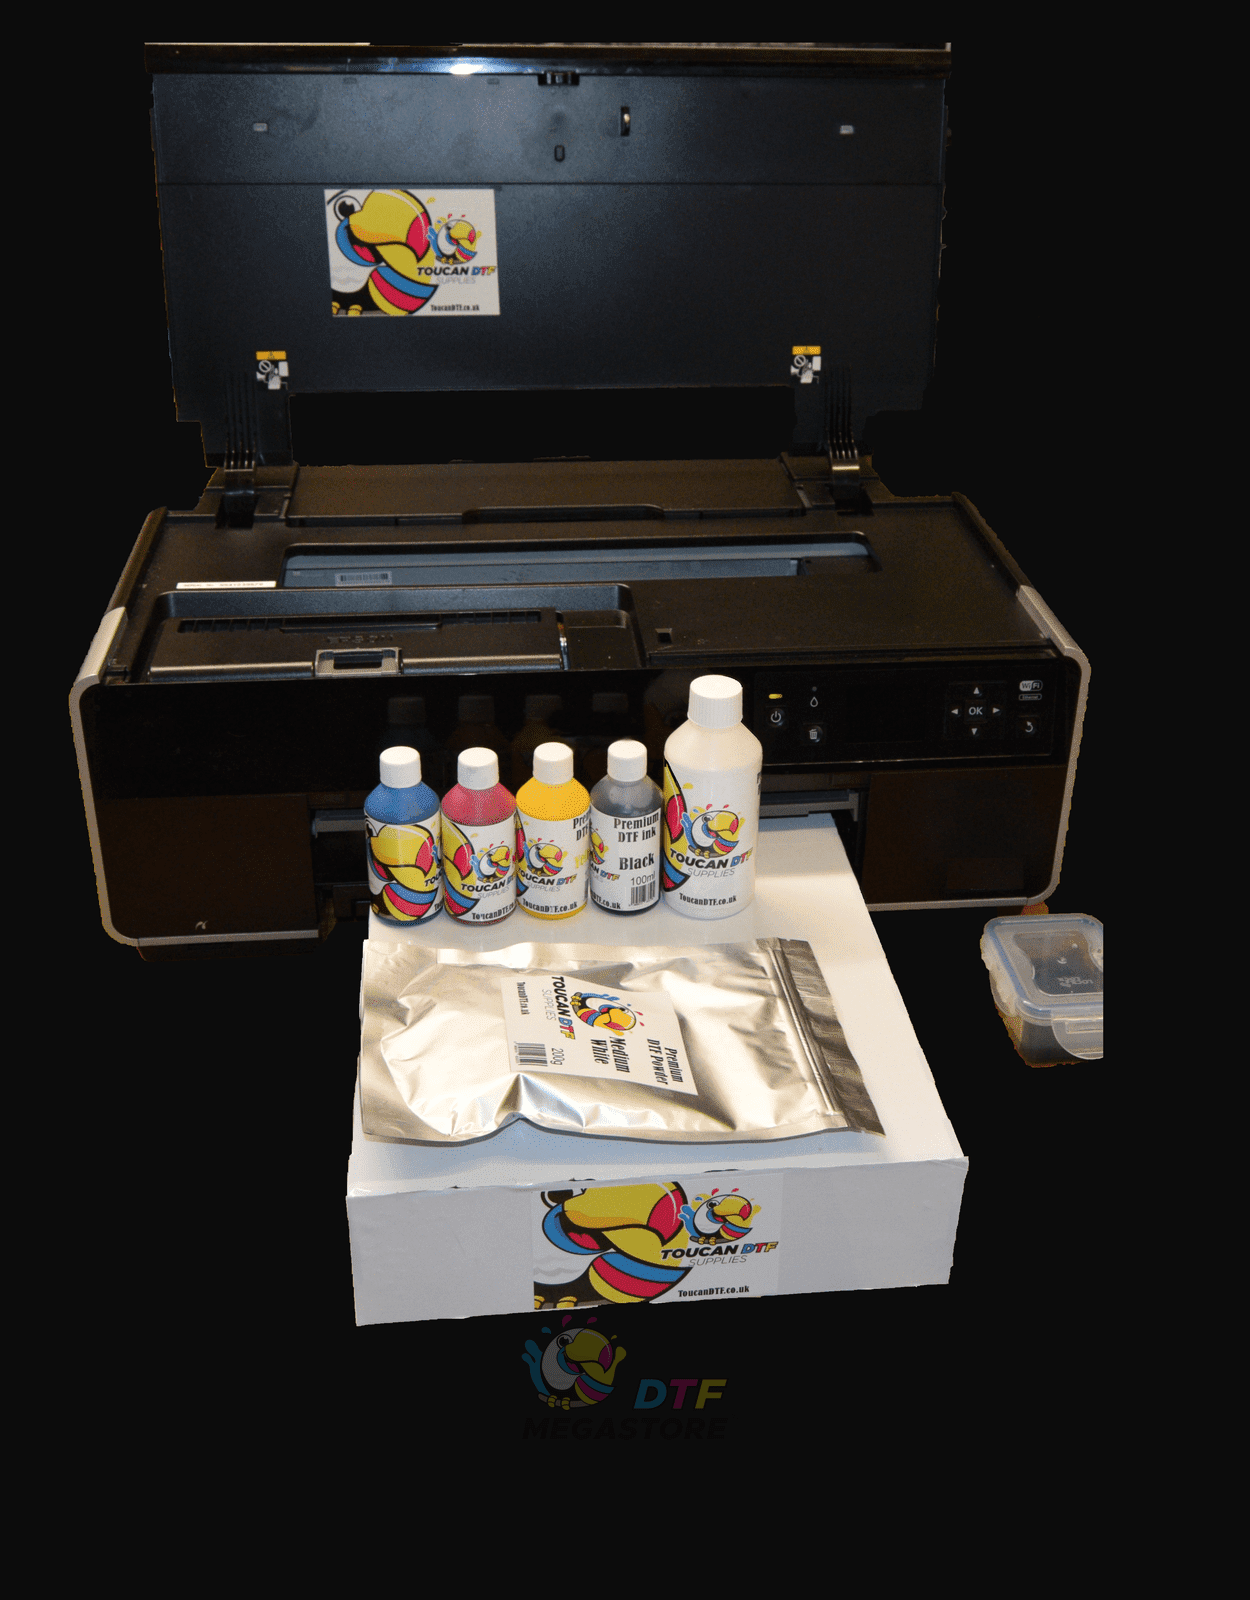 DTF Printer R3000 Refurbished with ink, powder and film - DTF Printing Supplies By DTF Megastore®